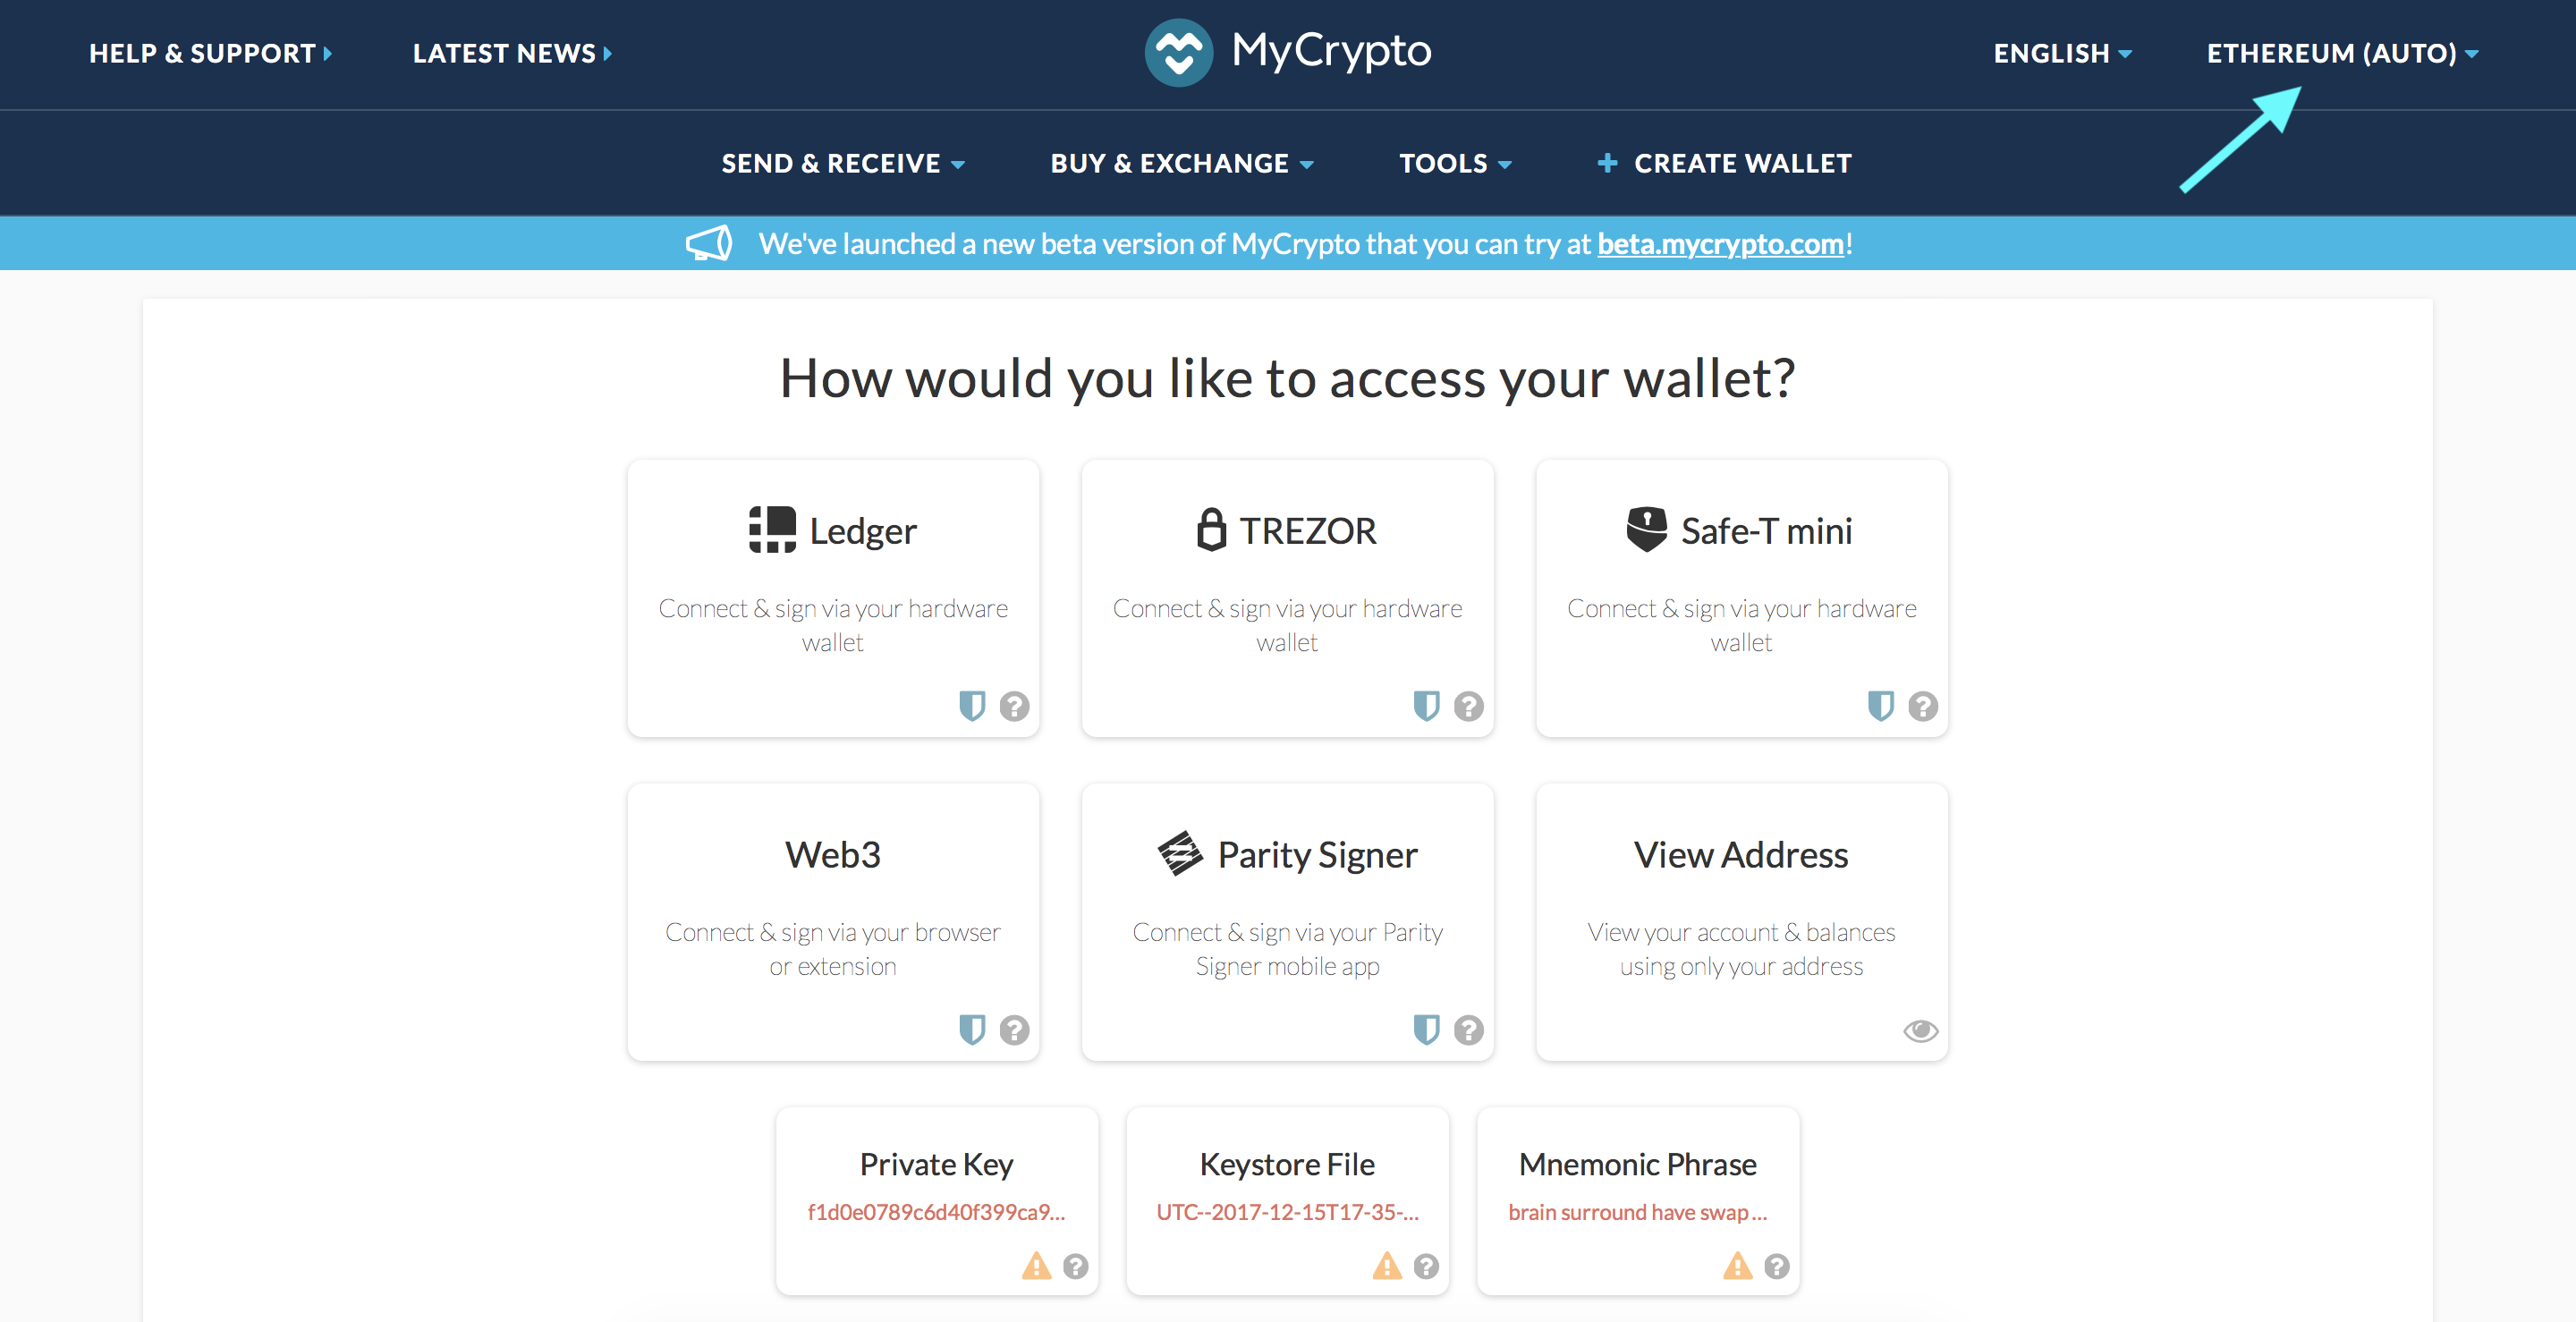 when i unlock myetherwallet with metamask it shows a different address